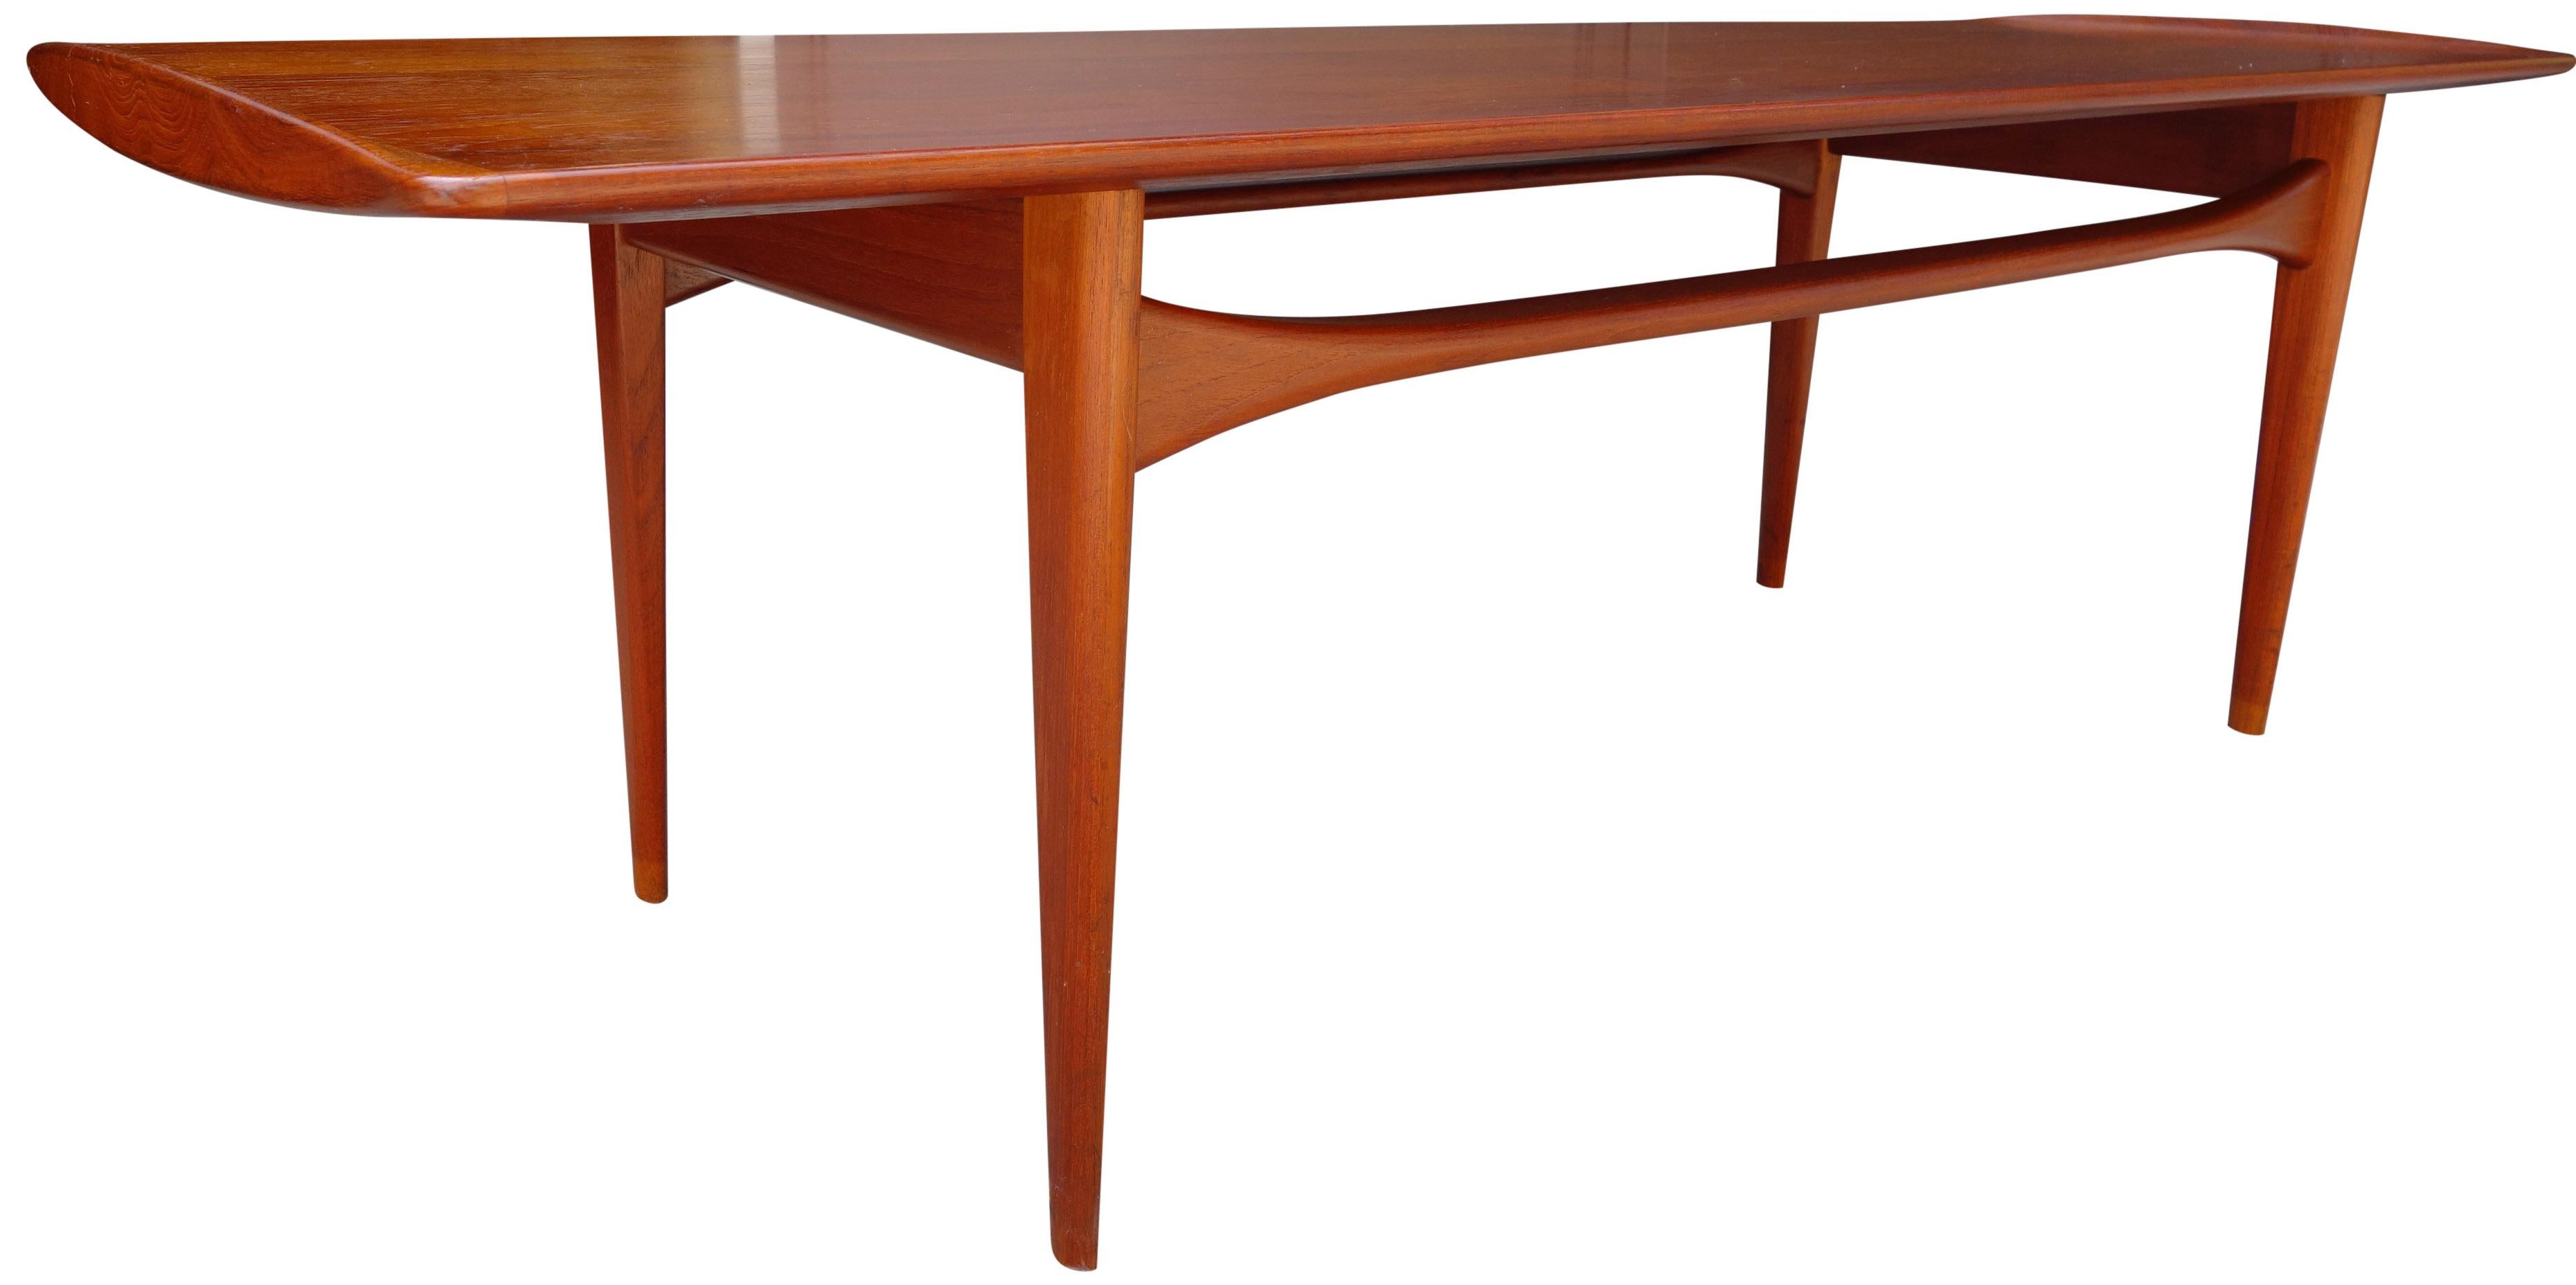 Midcentury Danish Modern Coffee Table by Kindt-Larsen for France and Daverkosen In Good Condition For Sale In BROOKLYN, NY